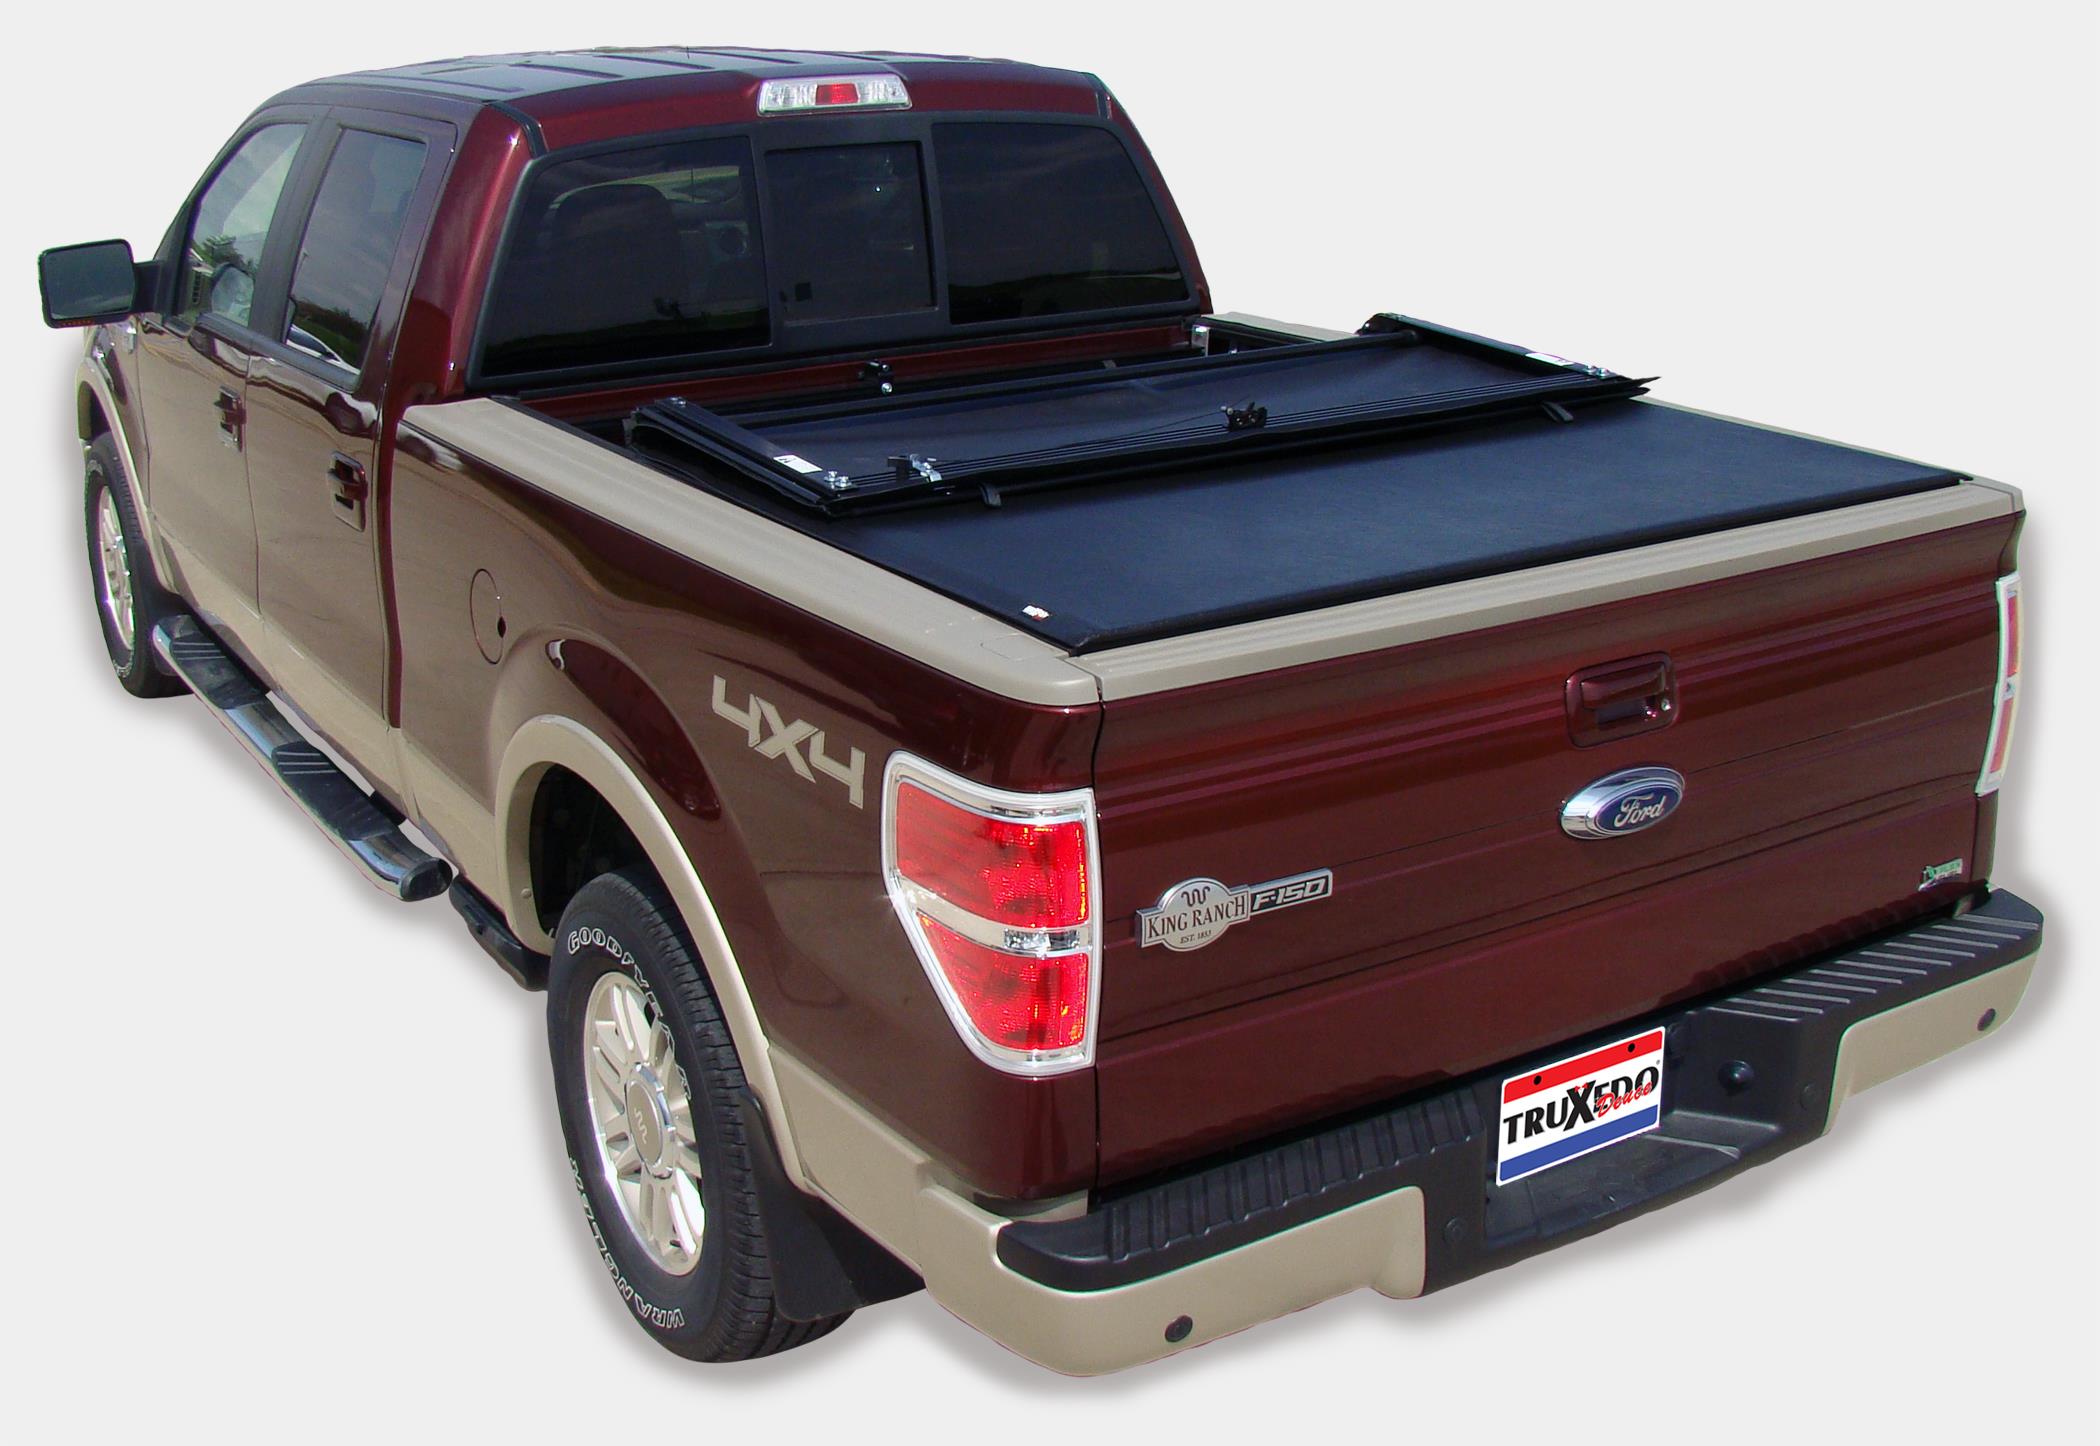 Truxedo First And Only Soft Roll Up Tonneau Cover With A Hinged Bulkhead Panel For Easy Front Cargo Access 798701   (3 Biz Day Made to Order)